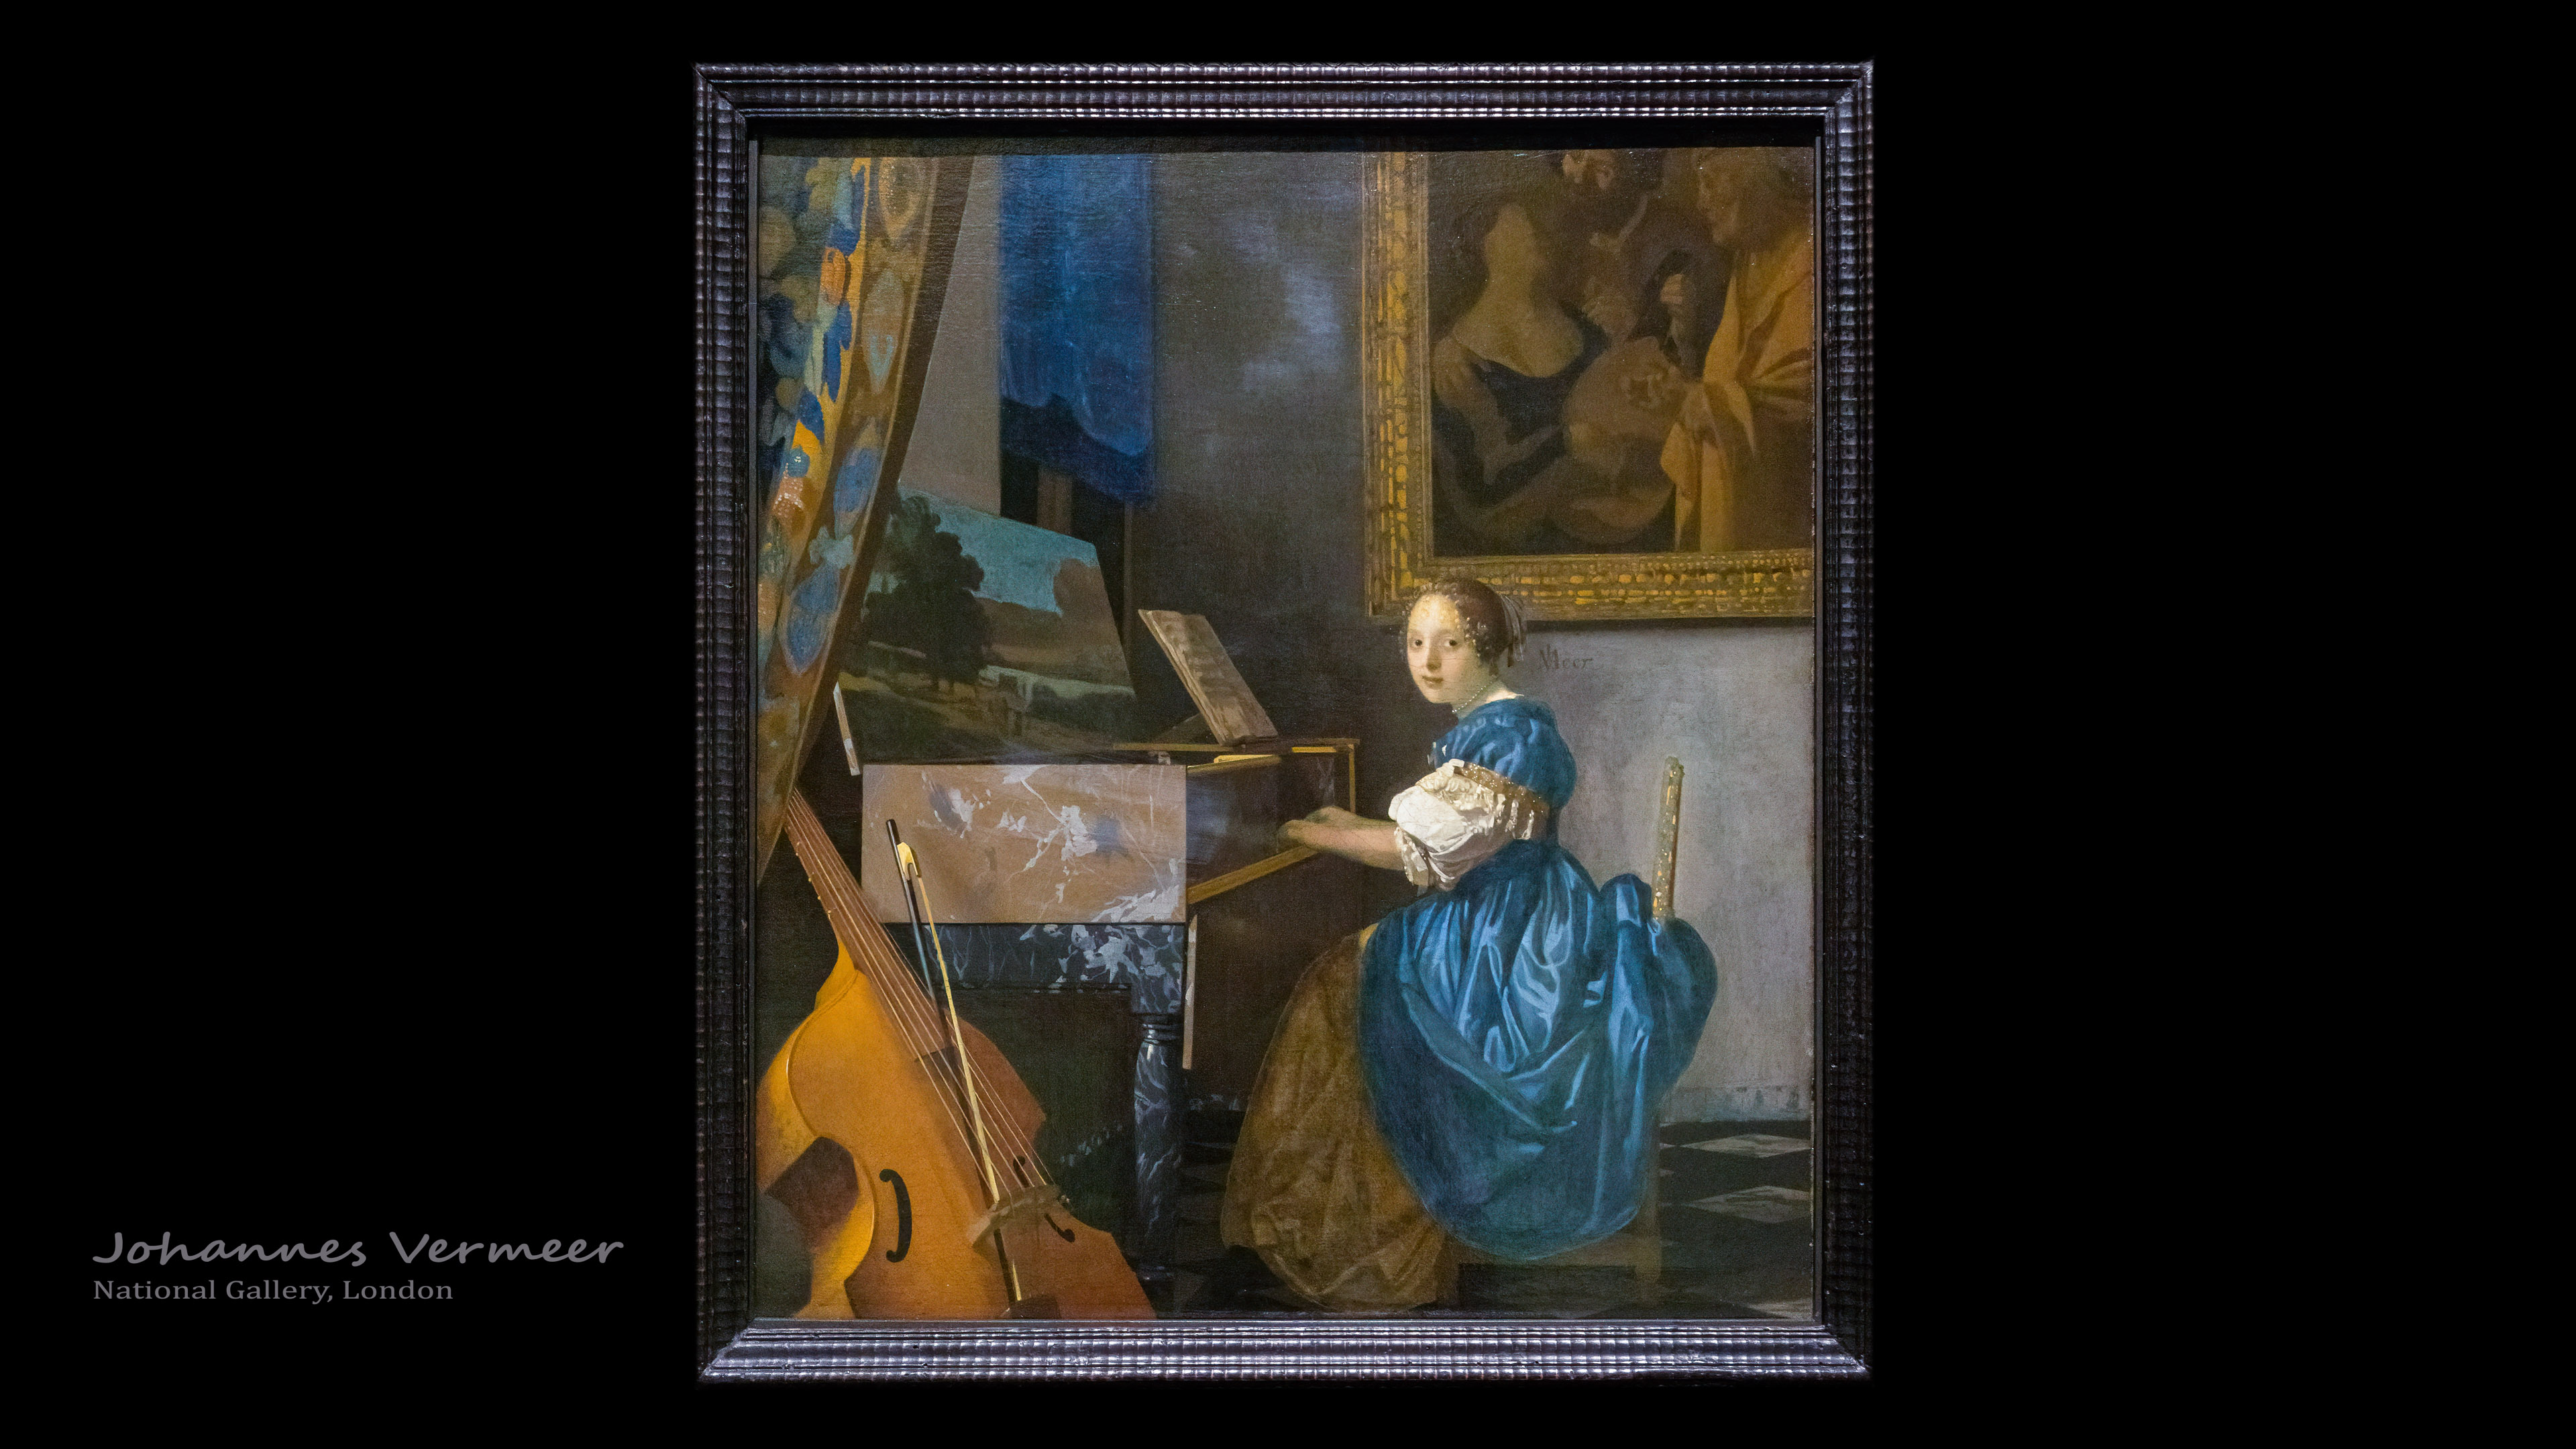 Adorn your screen with the mesmerizing beauty of Vermeer's famous paintings in 4K resolution.